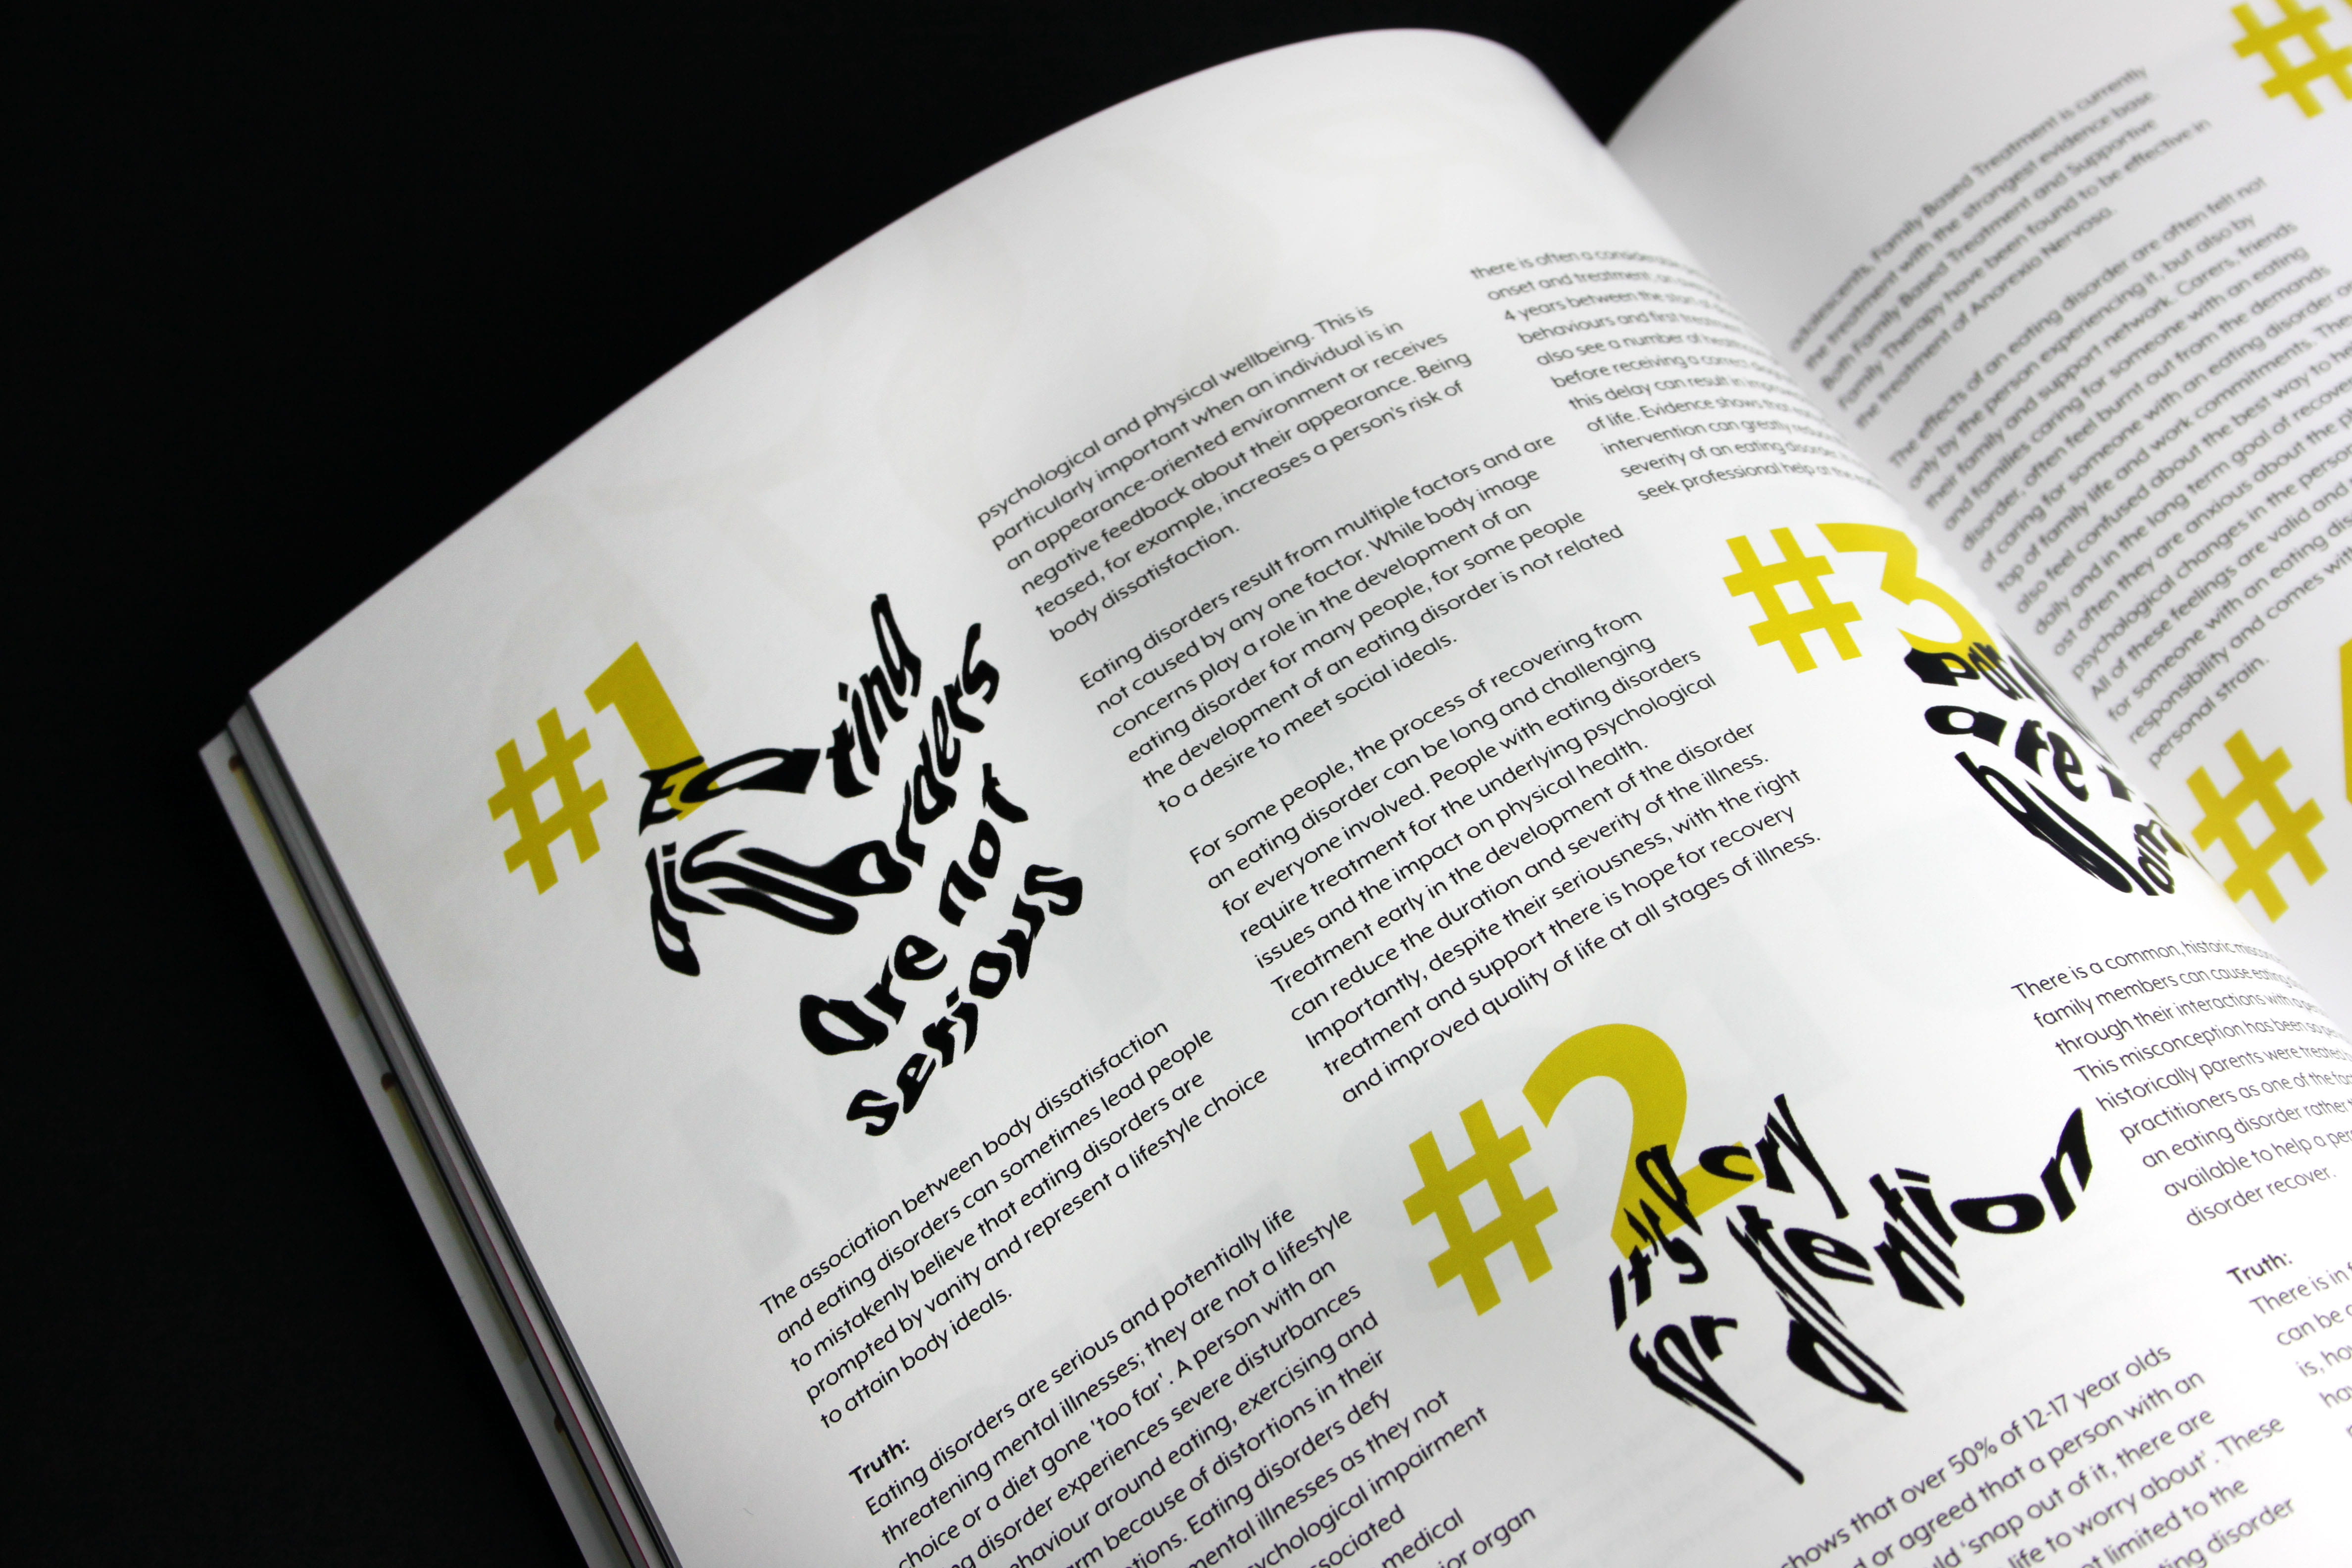 A magazine page with yellow numbers, overlapped by distorted text.